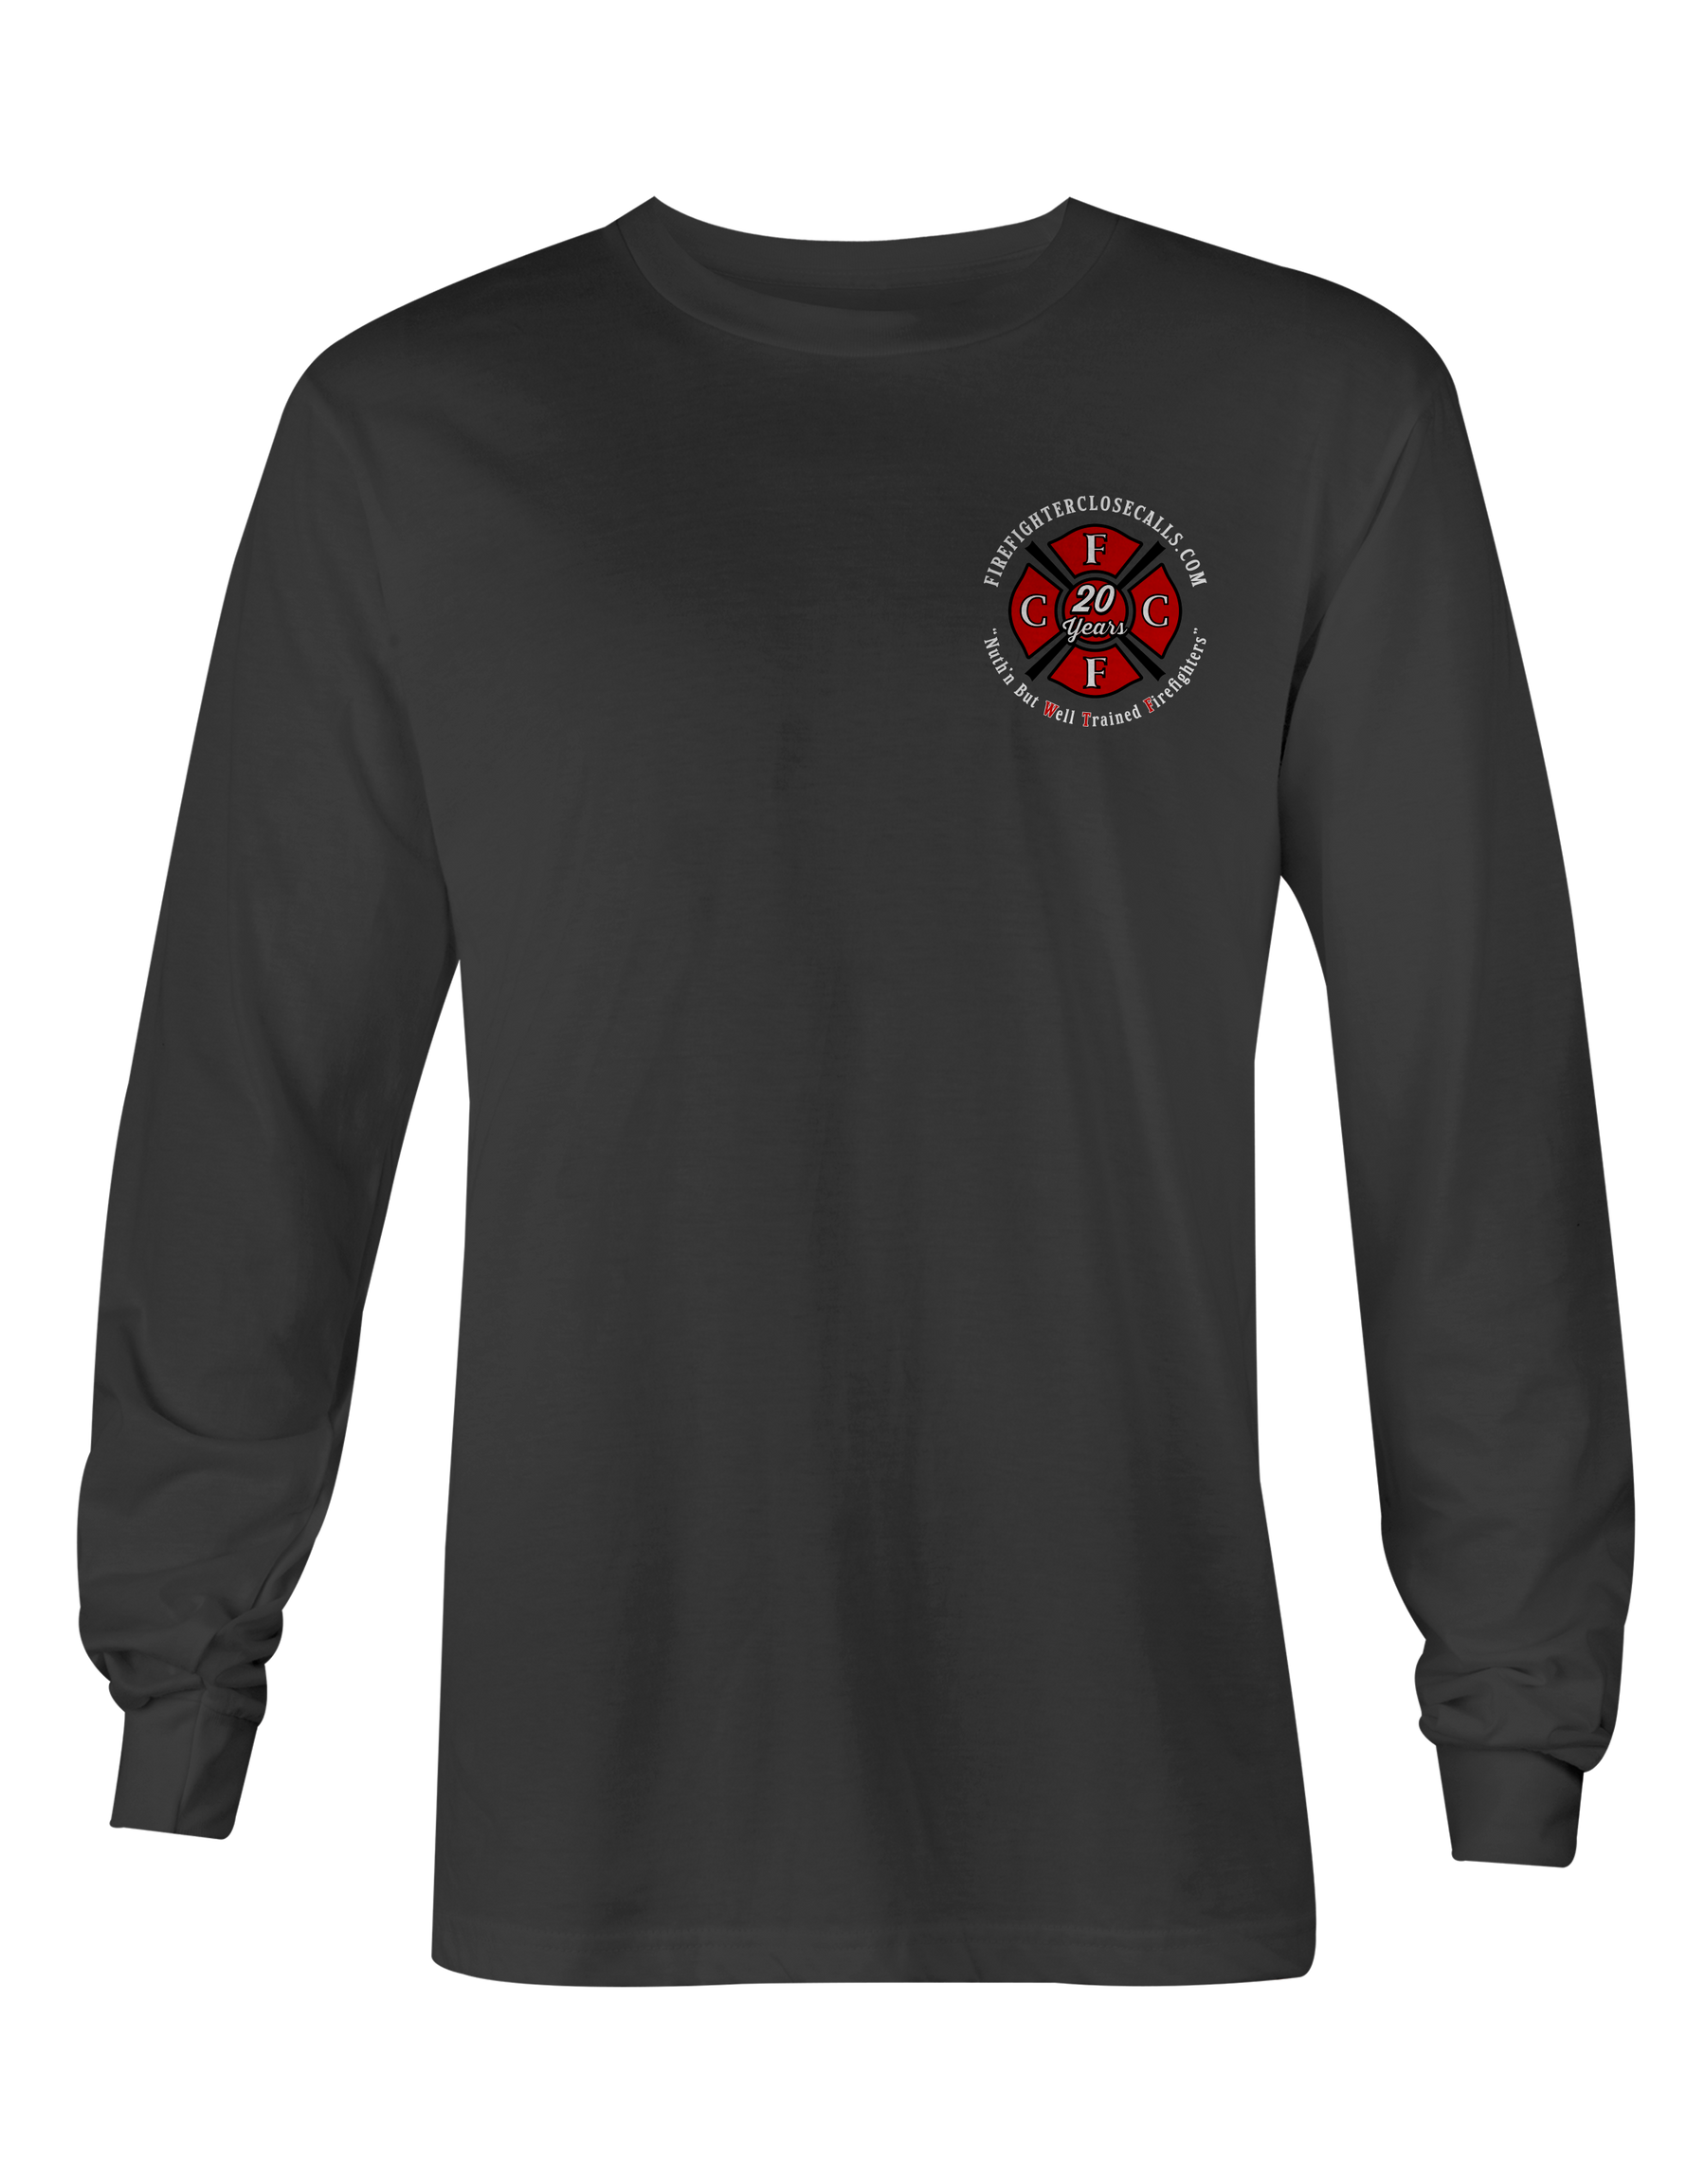 FireFightersclosecalls.com 20th Anniversary Charity Tee Long Sleeve ...